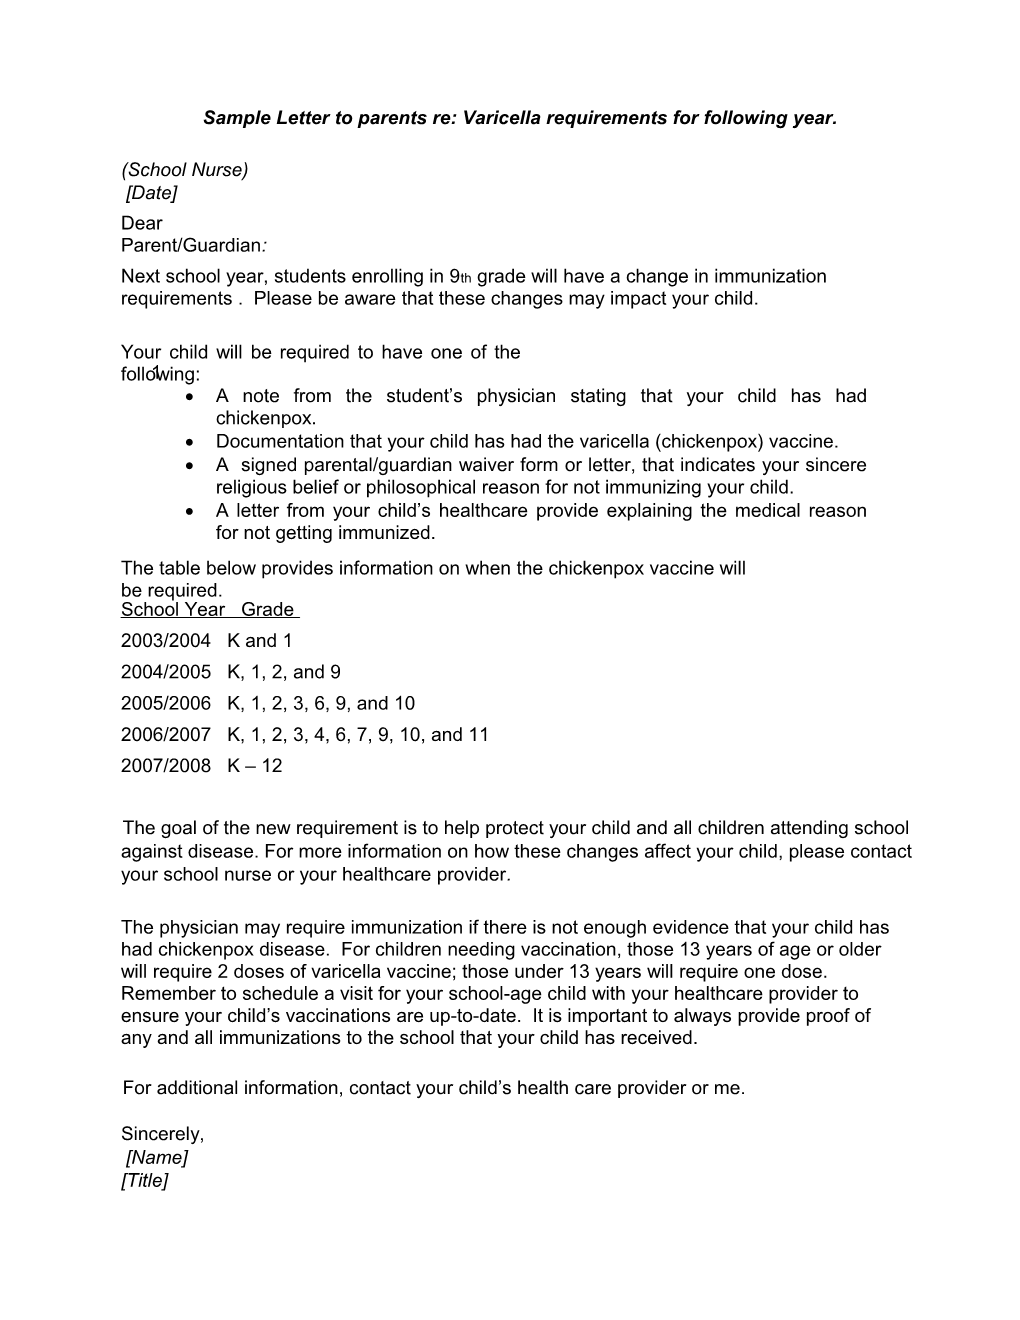 Sample Letter to Parents Re: Varicella Requirements for Following Year